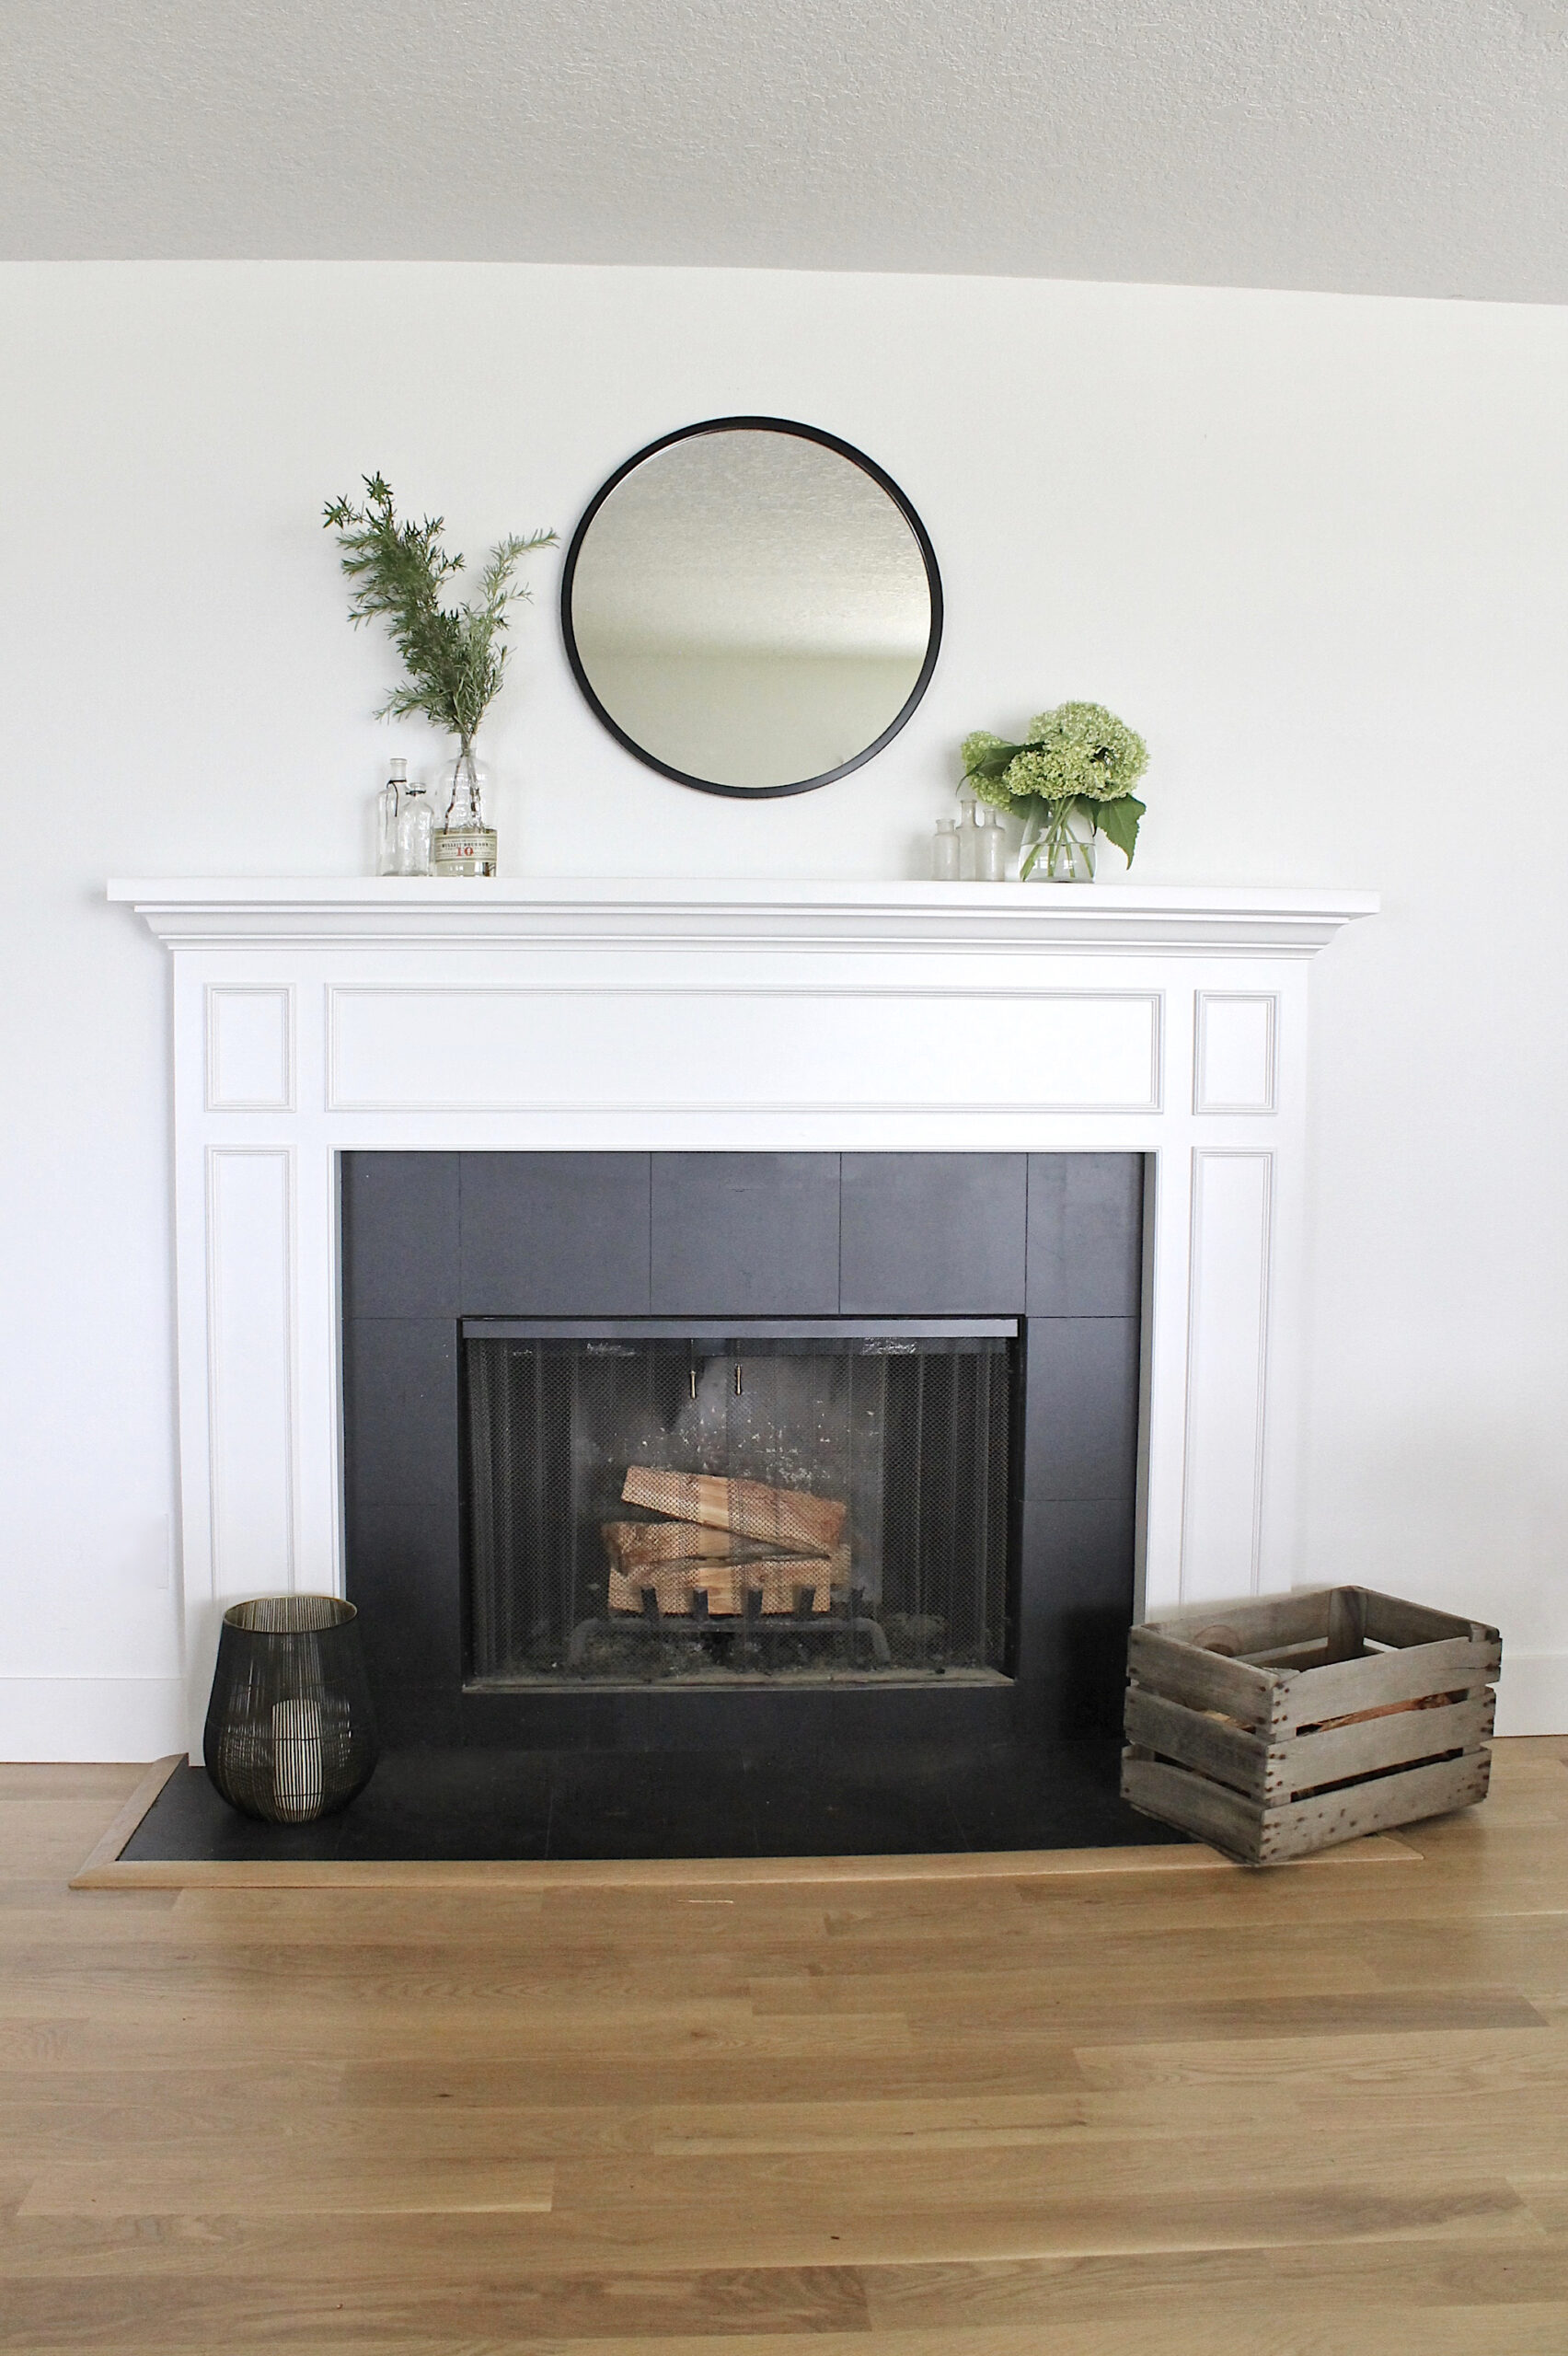 How To Paint A Ceramic Tile Fireplace, How To Paint Ceramic Tile Around A Fireplace